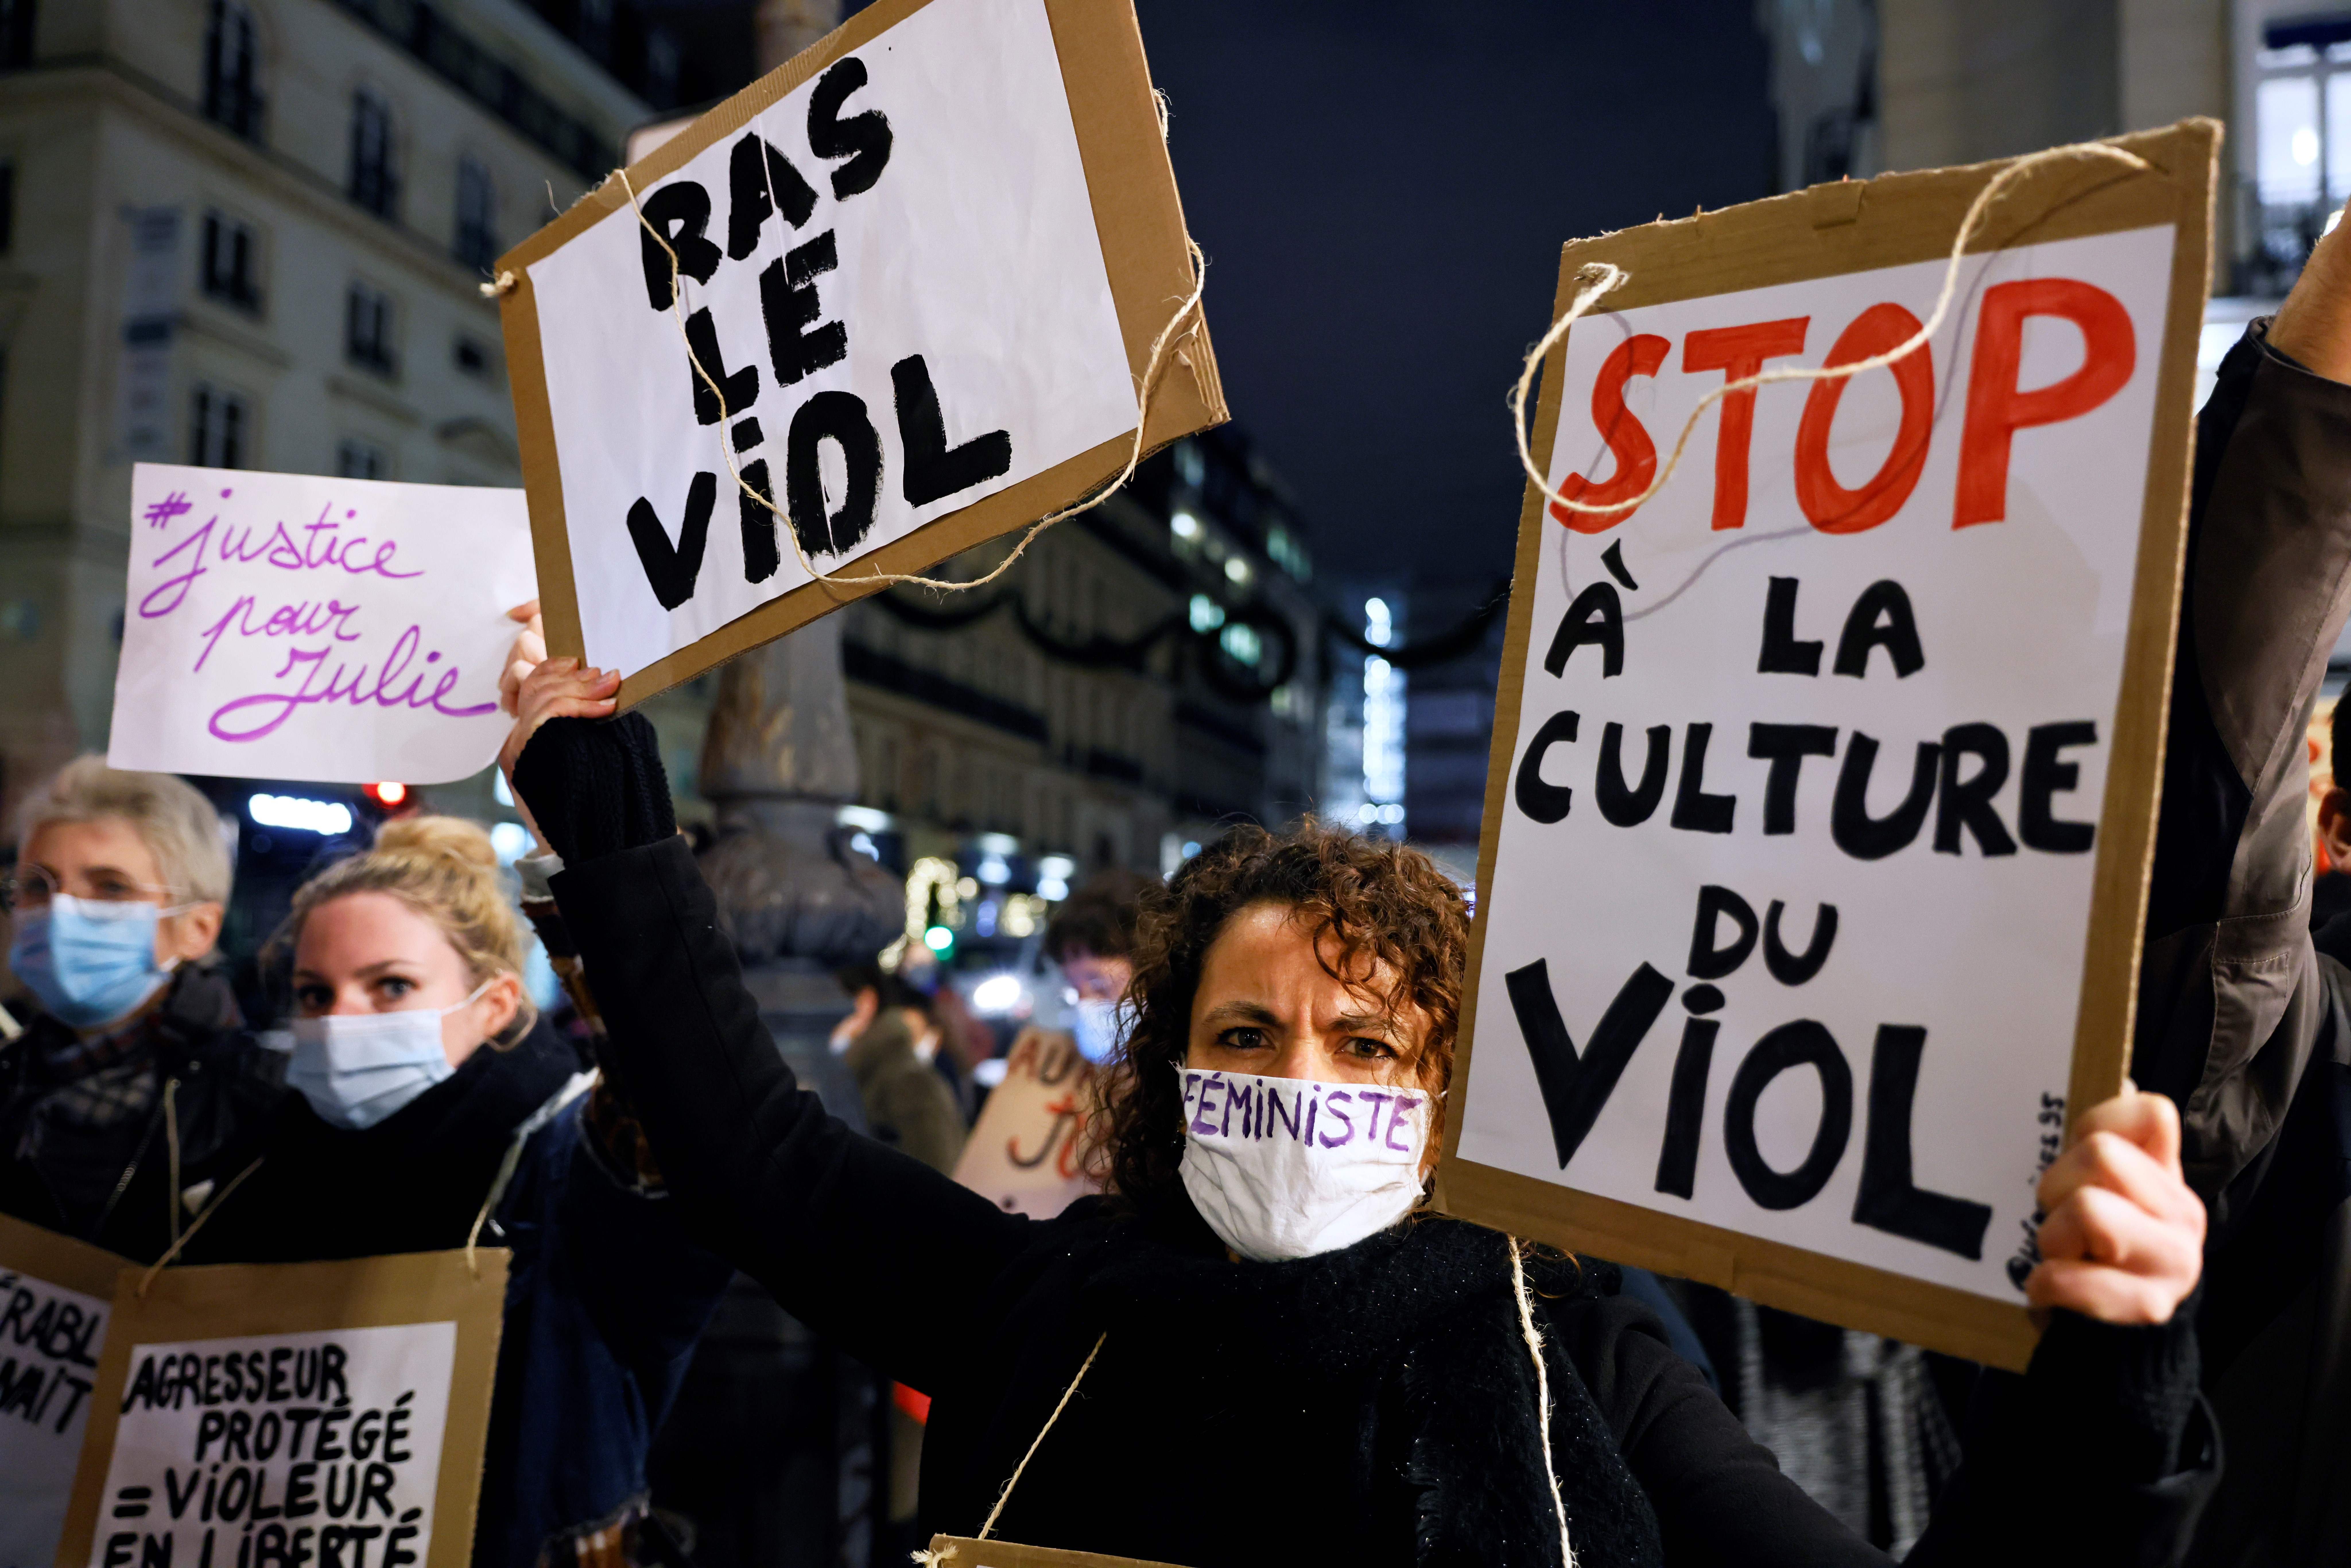 Protesters hold placards including one readiing "Stop to the culture of rape" during a demonstration called by feminist groups after a French court retained the legal classification of "sexual infringement", in the accusation of three firefighters over relations with a 14-year-old minor, "Julie" photo.